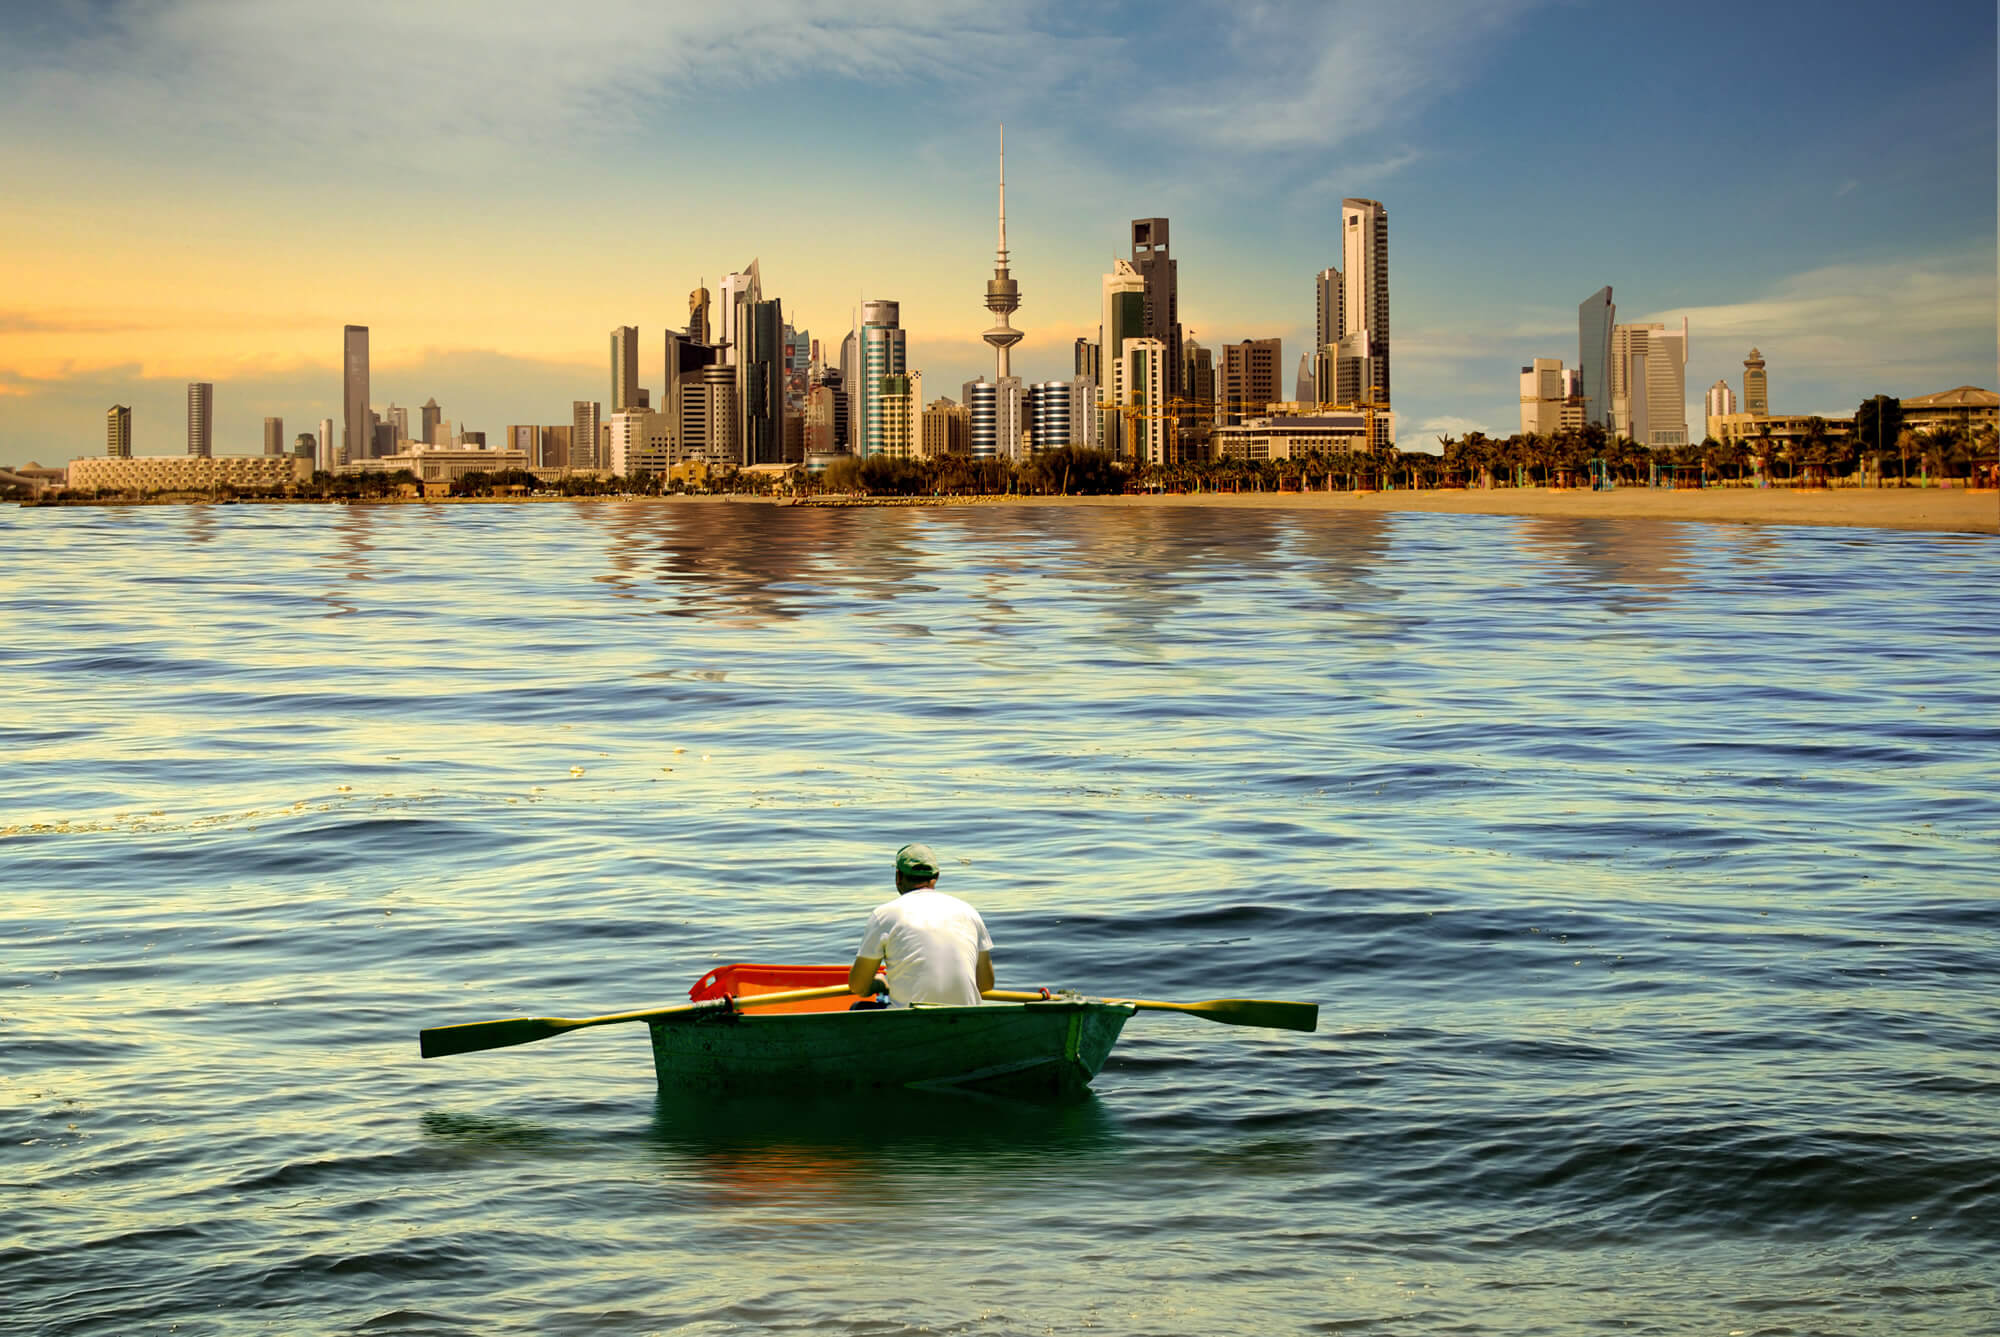 Rowing Boat on the Sea of Kuwait City